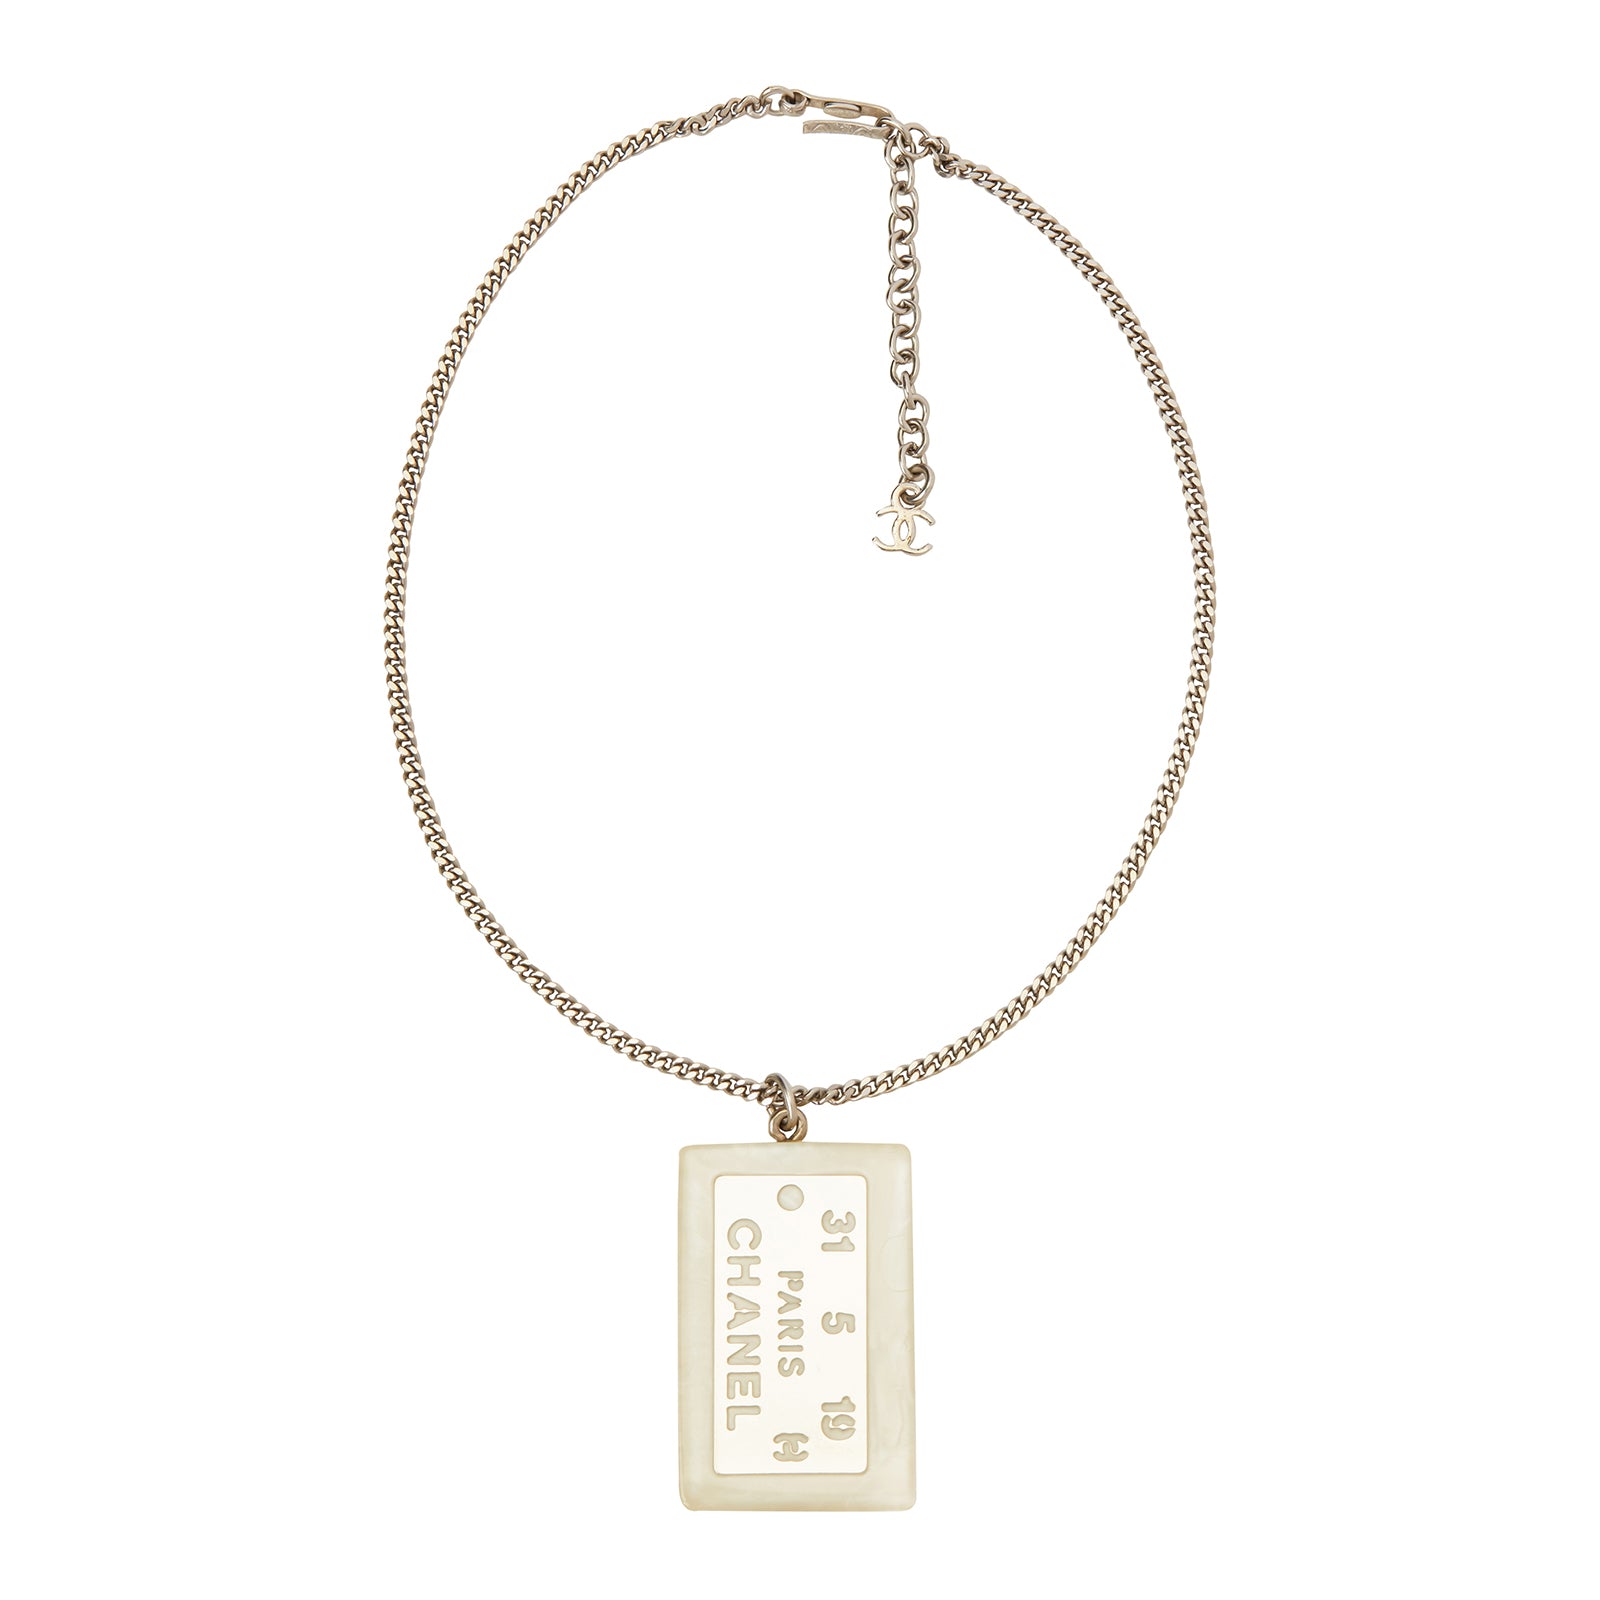 Chanel Tag Necklace